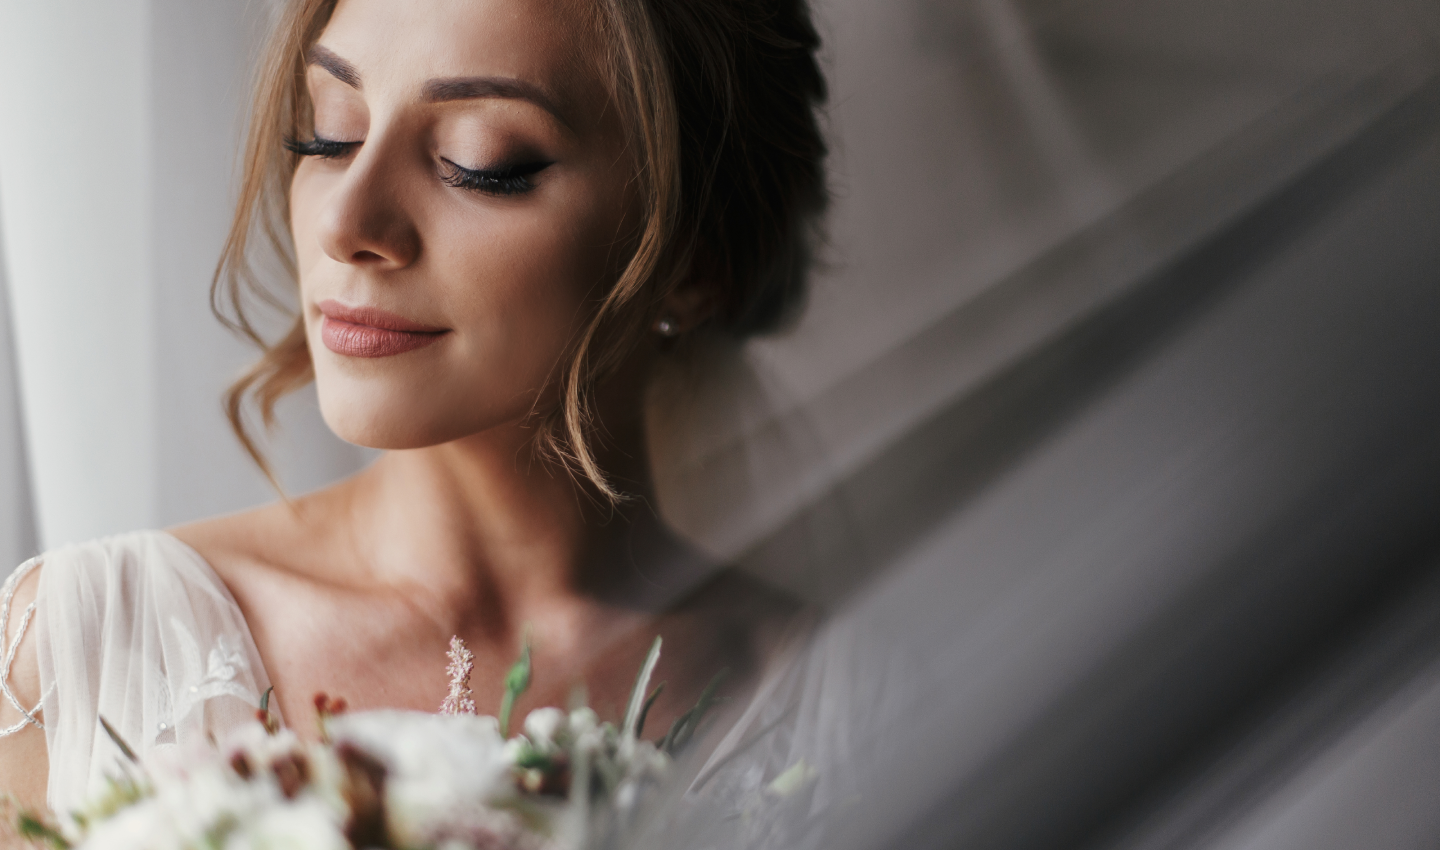 Minimal Natural Wedding Makeup: A stunning bride with a bouquet, posing at a window in soft light.